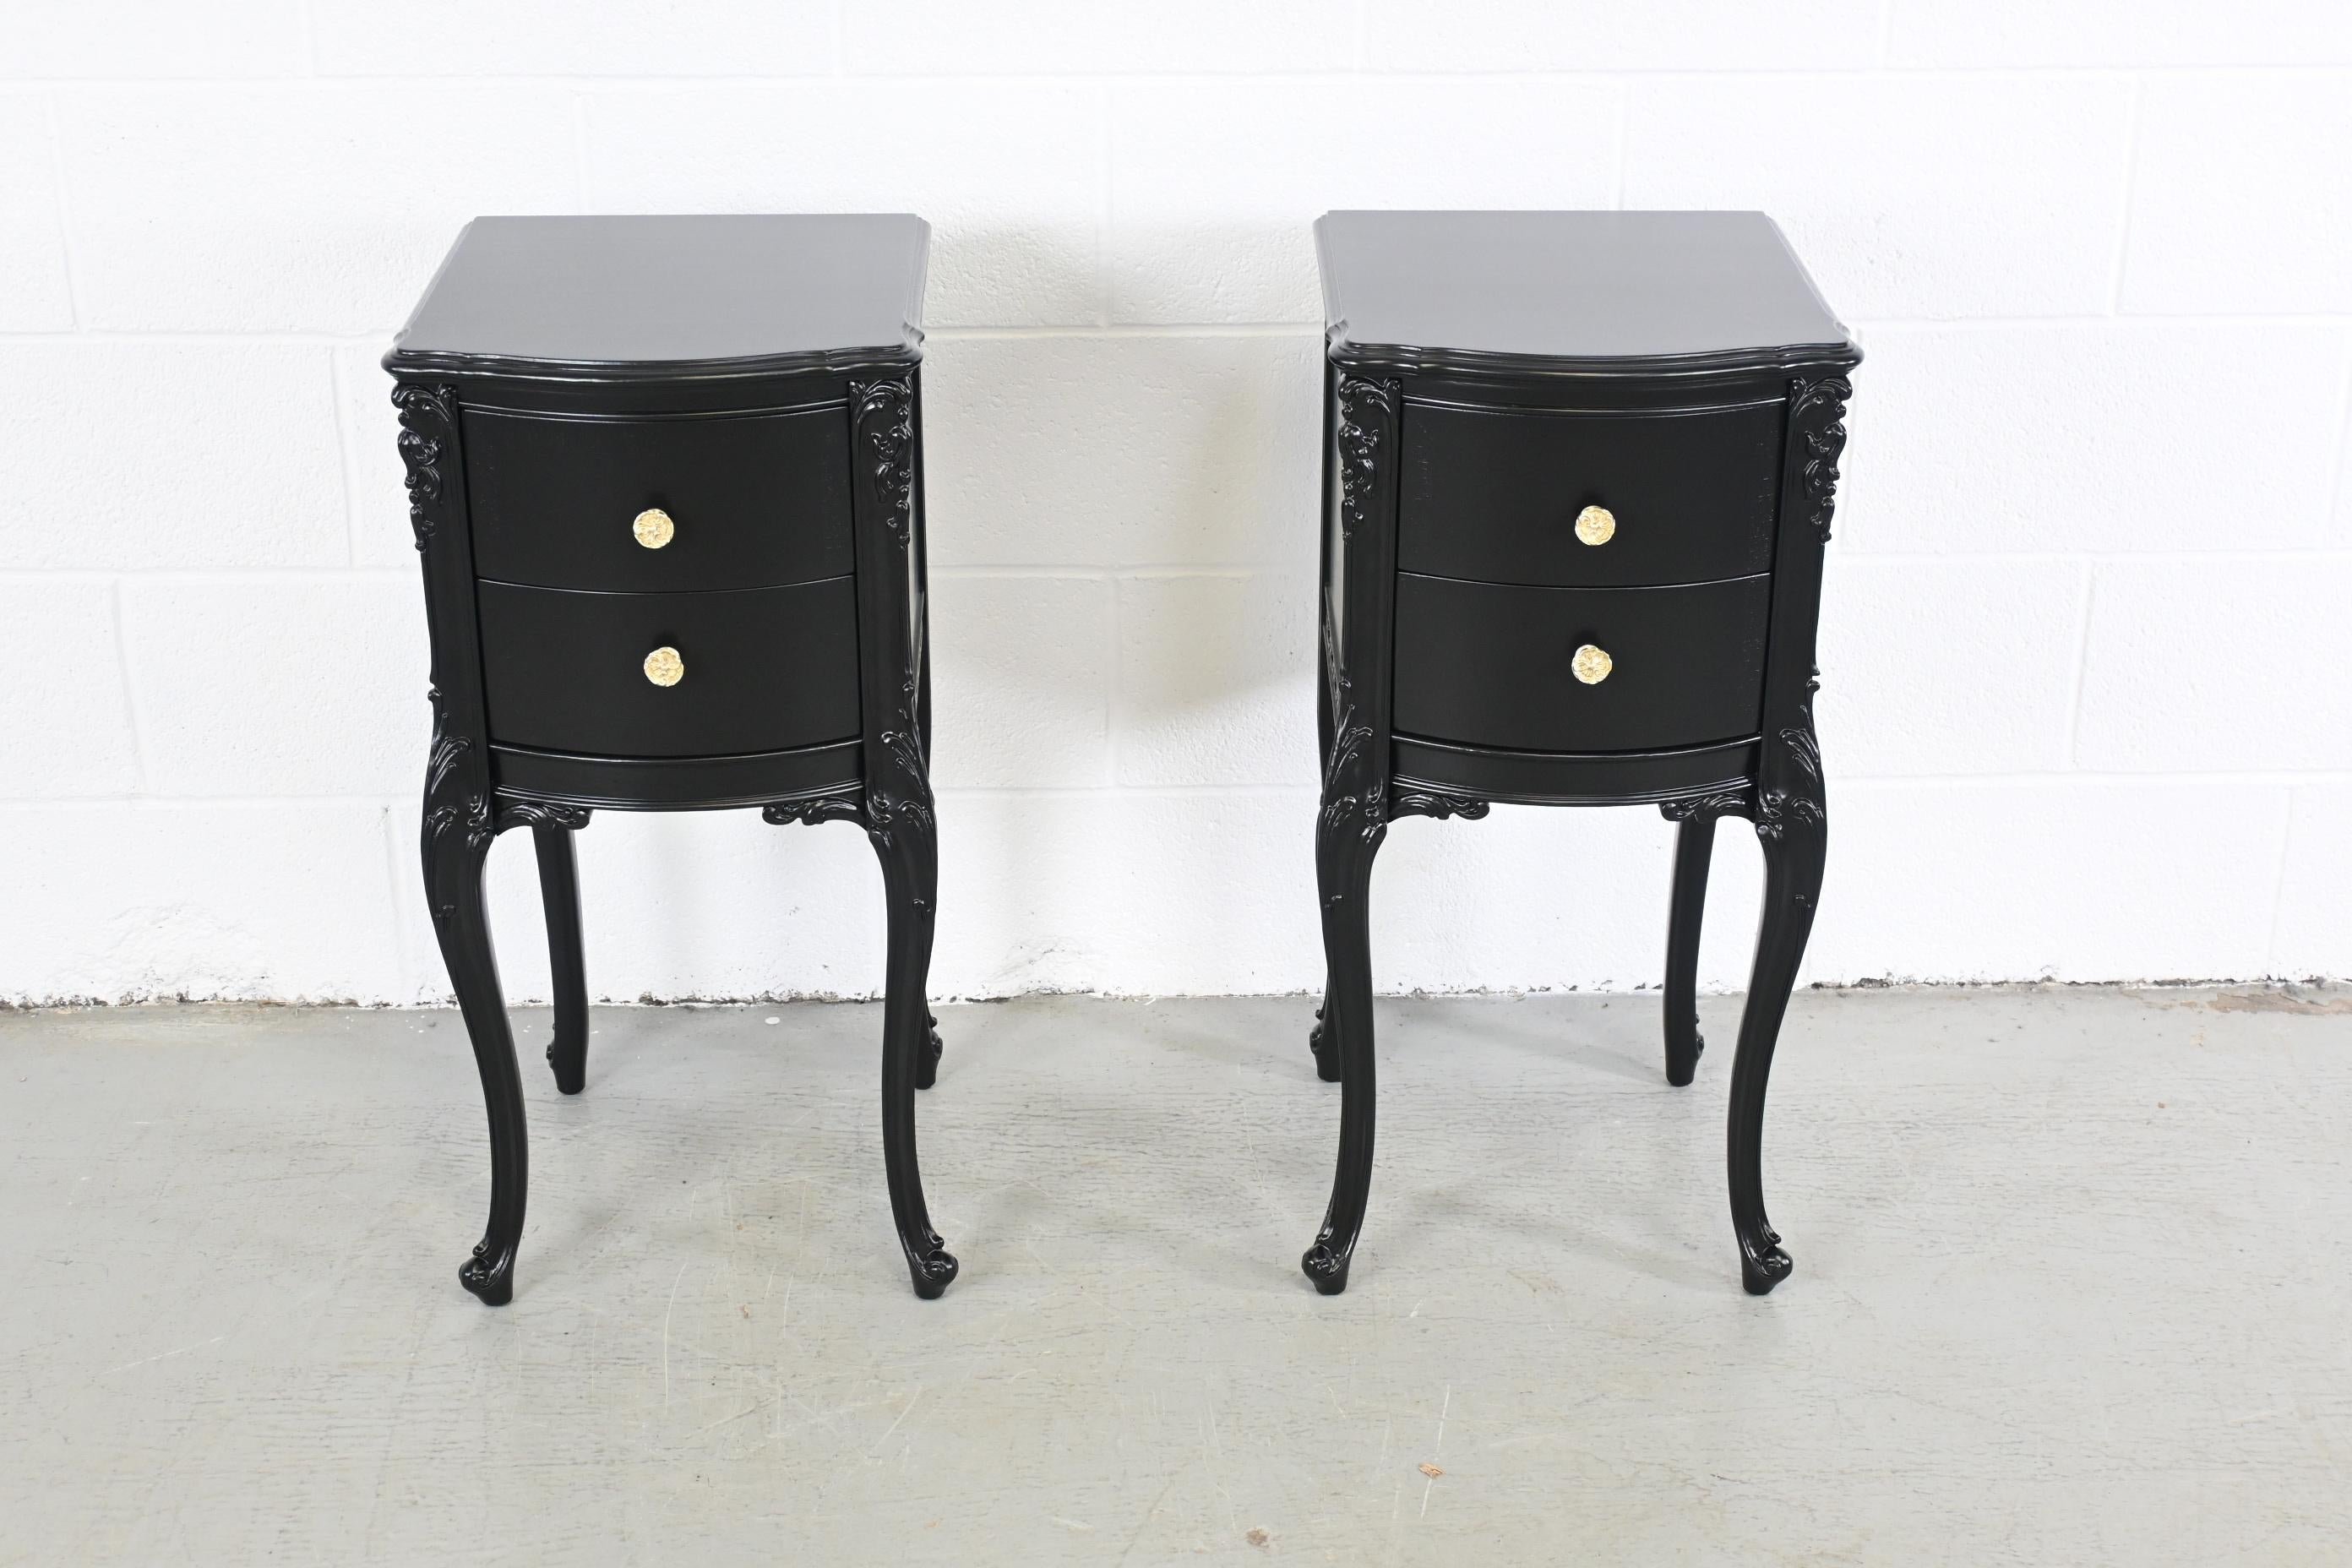 Antique French Rococo Style Black Lacquered Nightstands, a Pair

Unmarked, USA, 1940s

14.25